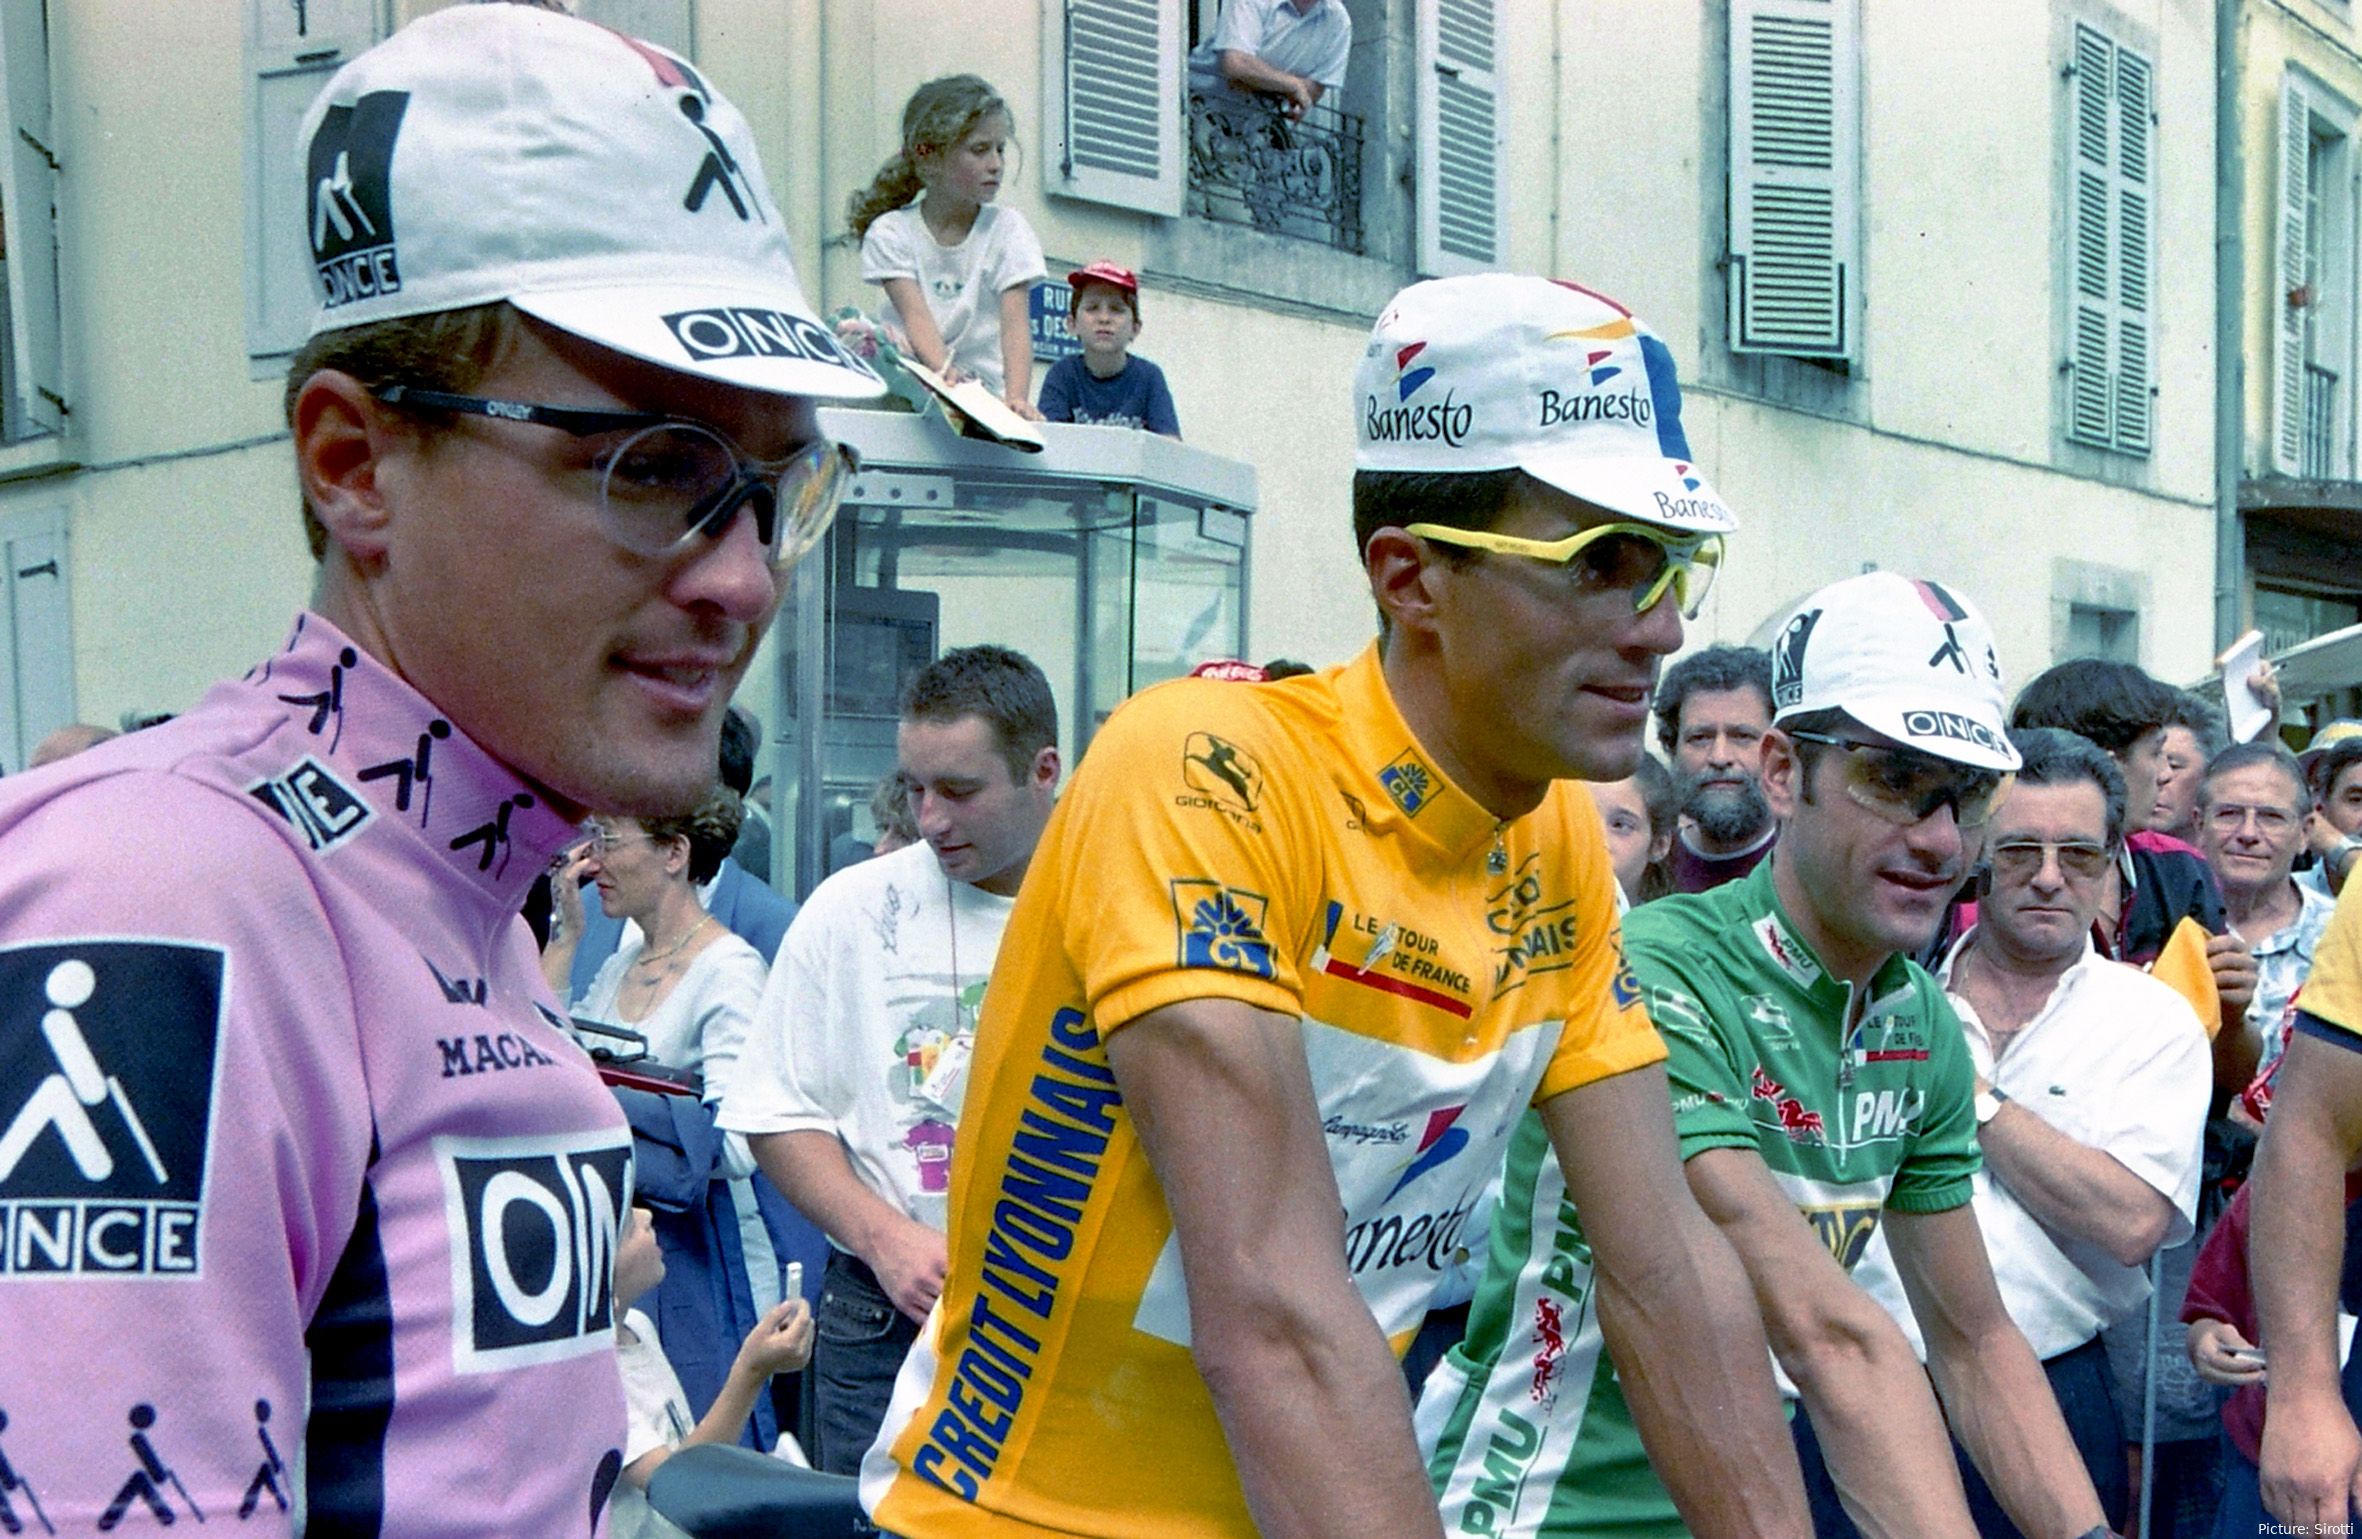 Miguel Indurain together with 90's legends Laurent Jalabert and Alex Zulle. @Sirotti